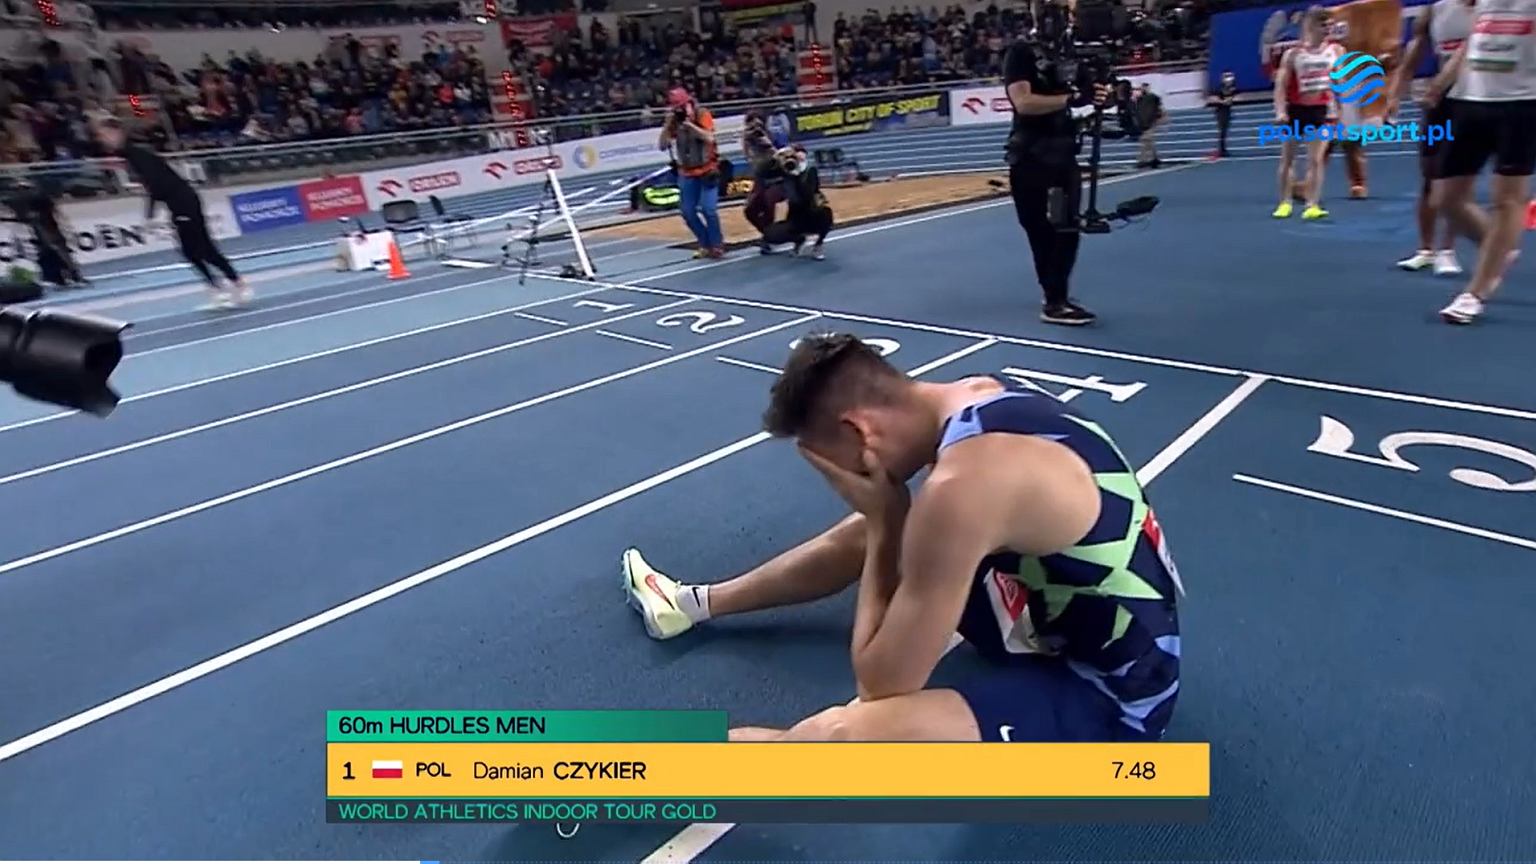 The formidable Czykier broke the 23-year-old Polish record!  He fell on the treadmill and burst into tears